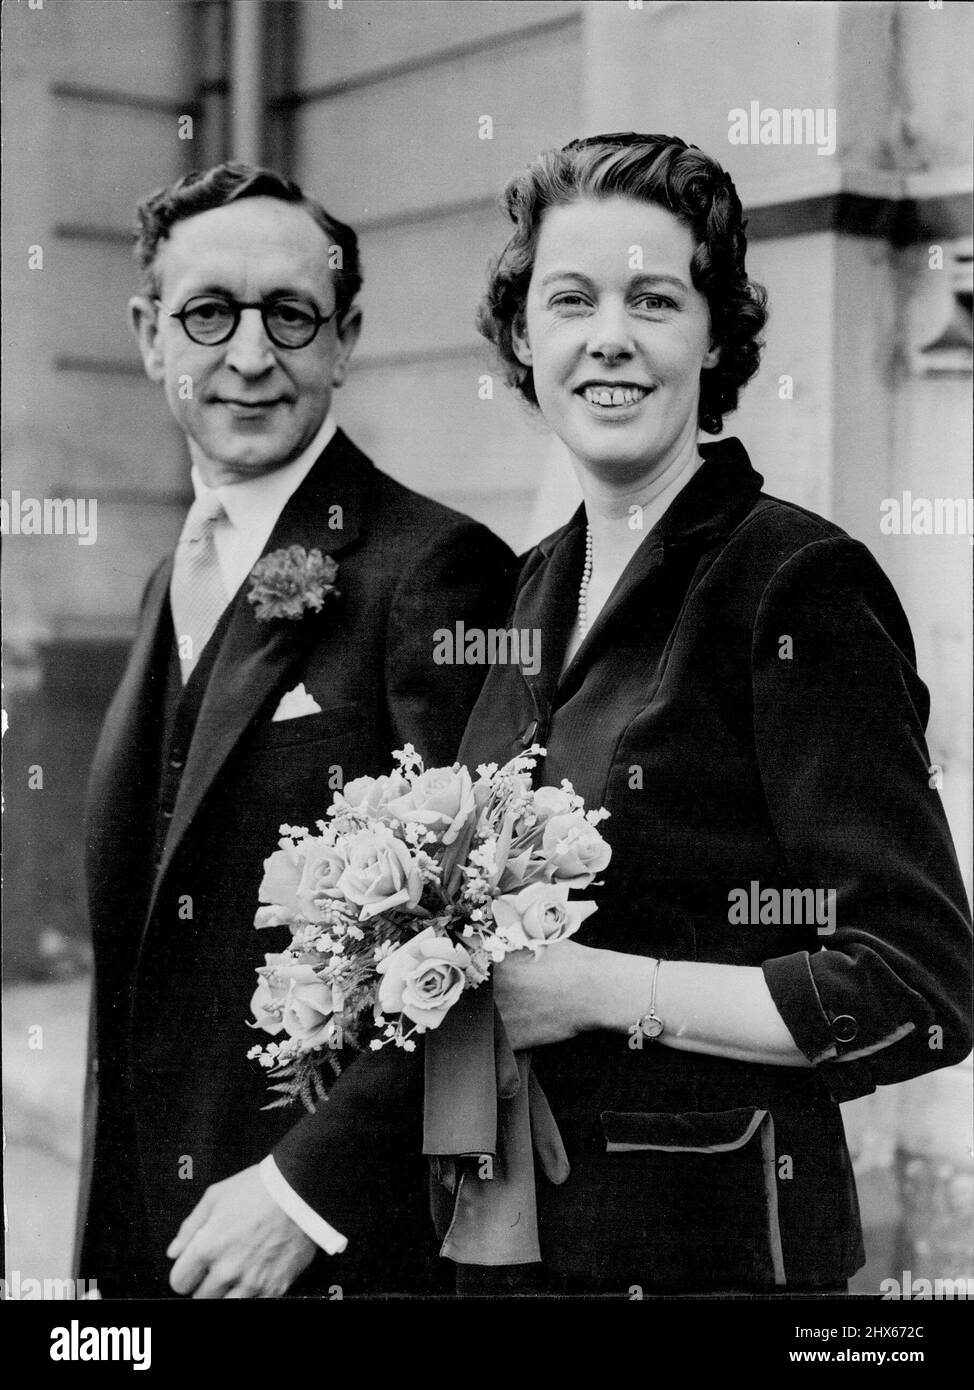 Composer Weds -- Mr. Charles Zwar, a composer of theatre music, youngest son of the late Mr. and Mrs. Charles Zwar of Broadford, Victoria, Australia, leaves the Church of St. George the Martyr, Queen Square, London, W.C., with his bride after their wedding to-day (Wednesday). She was Miss Diana Plankett, daughter of the late Brigadier Edward Plunkett and of Mrs. Plunkett of Chatsworth Court, Kensington, London. Miss Plunkett has been working on the administrative side of the theatre. December 21 Stock Photo